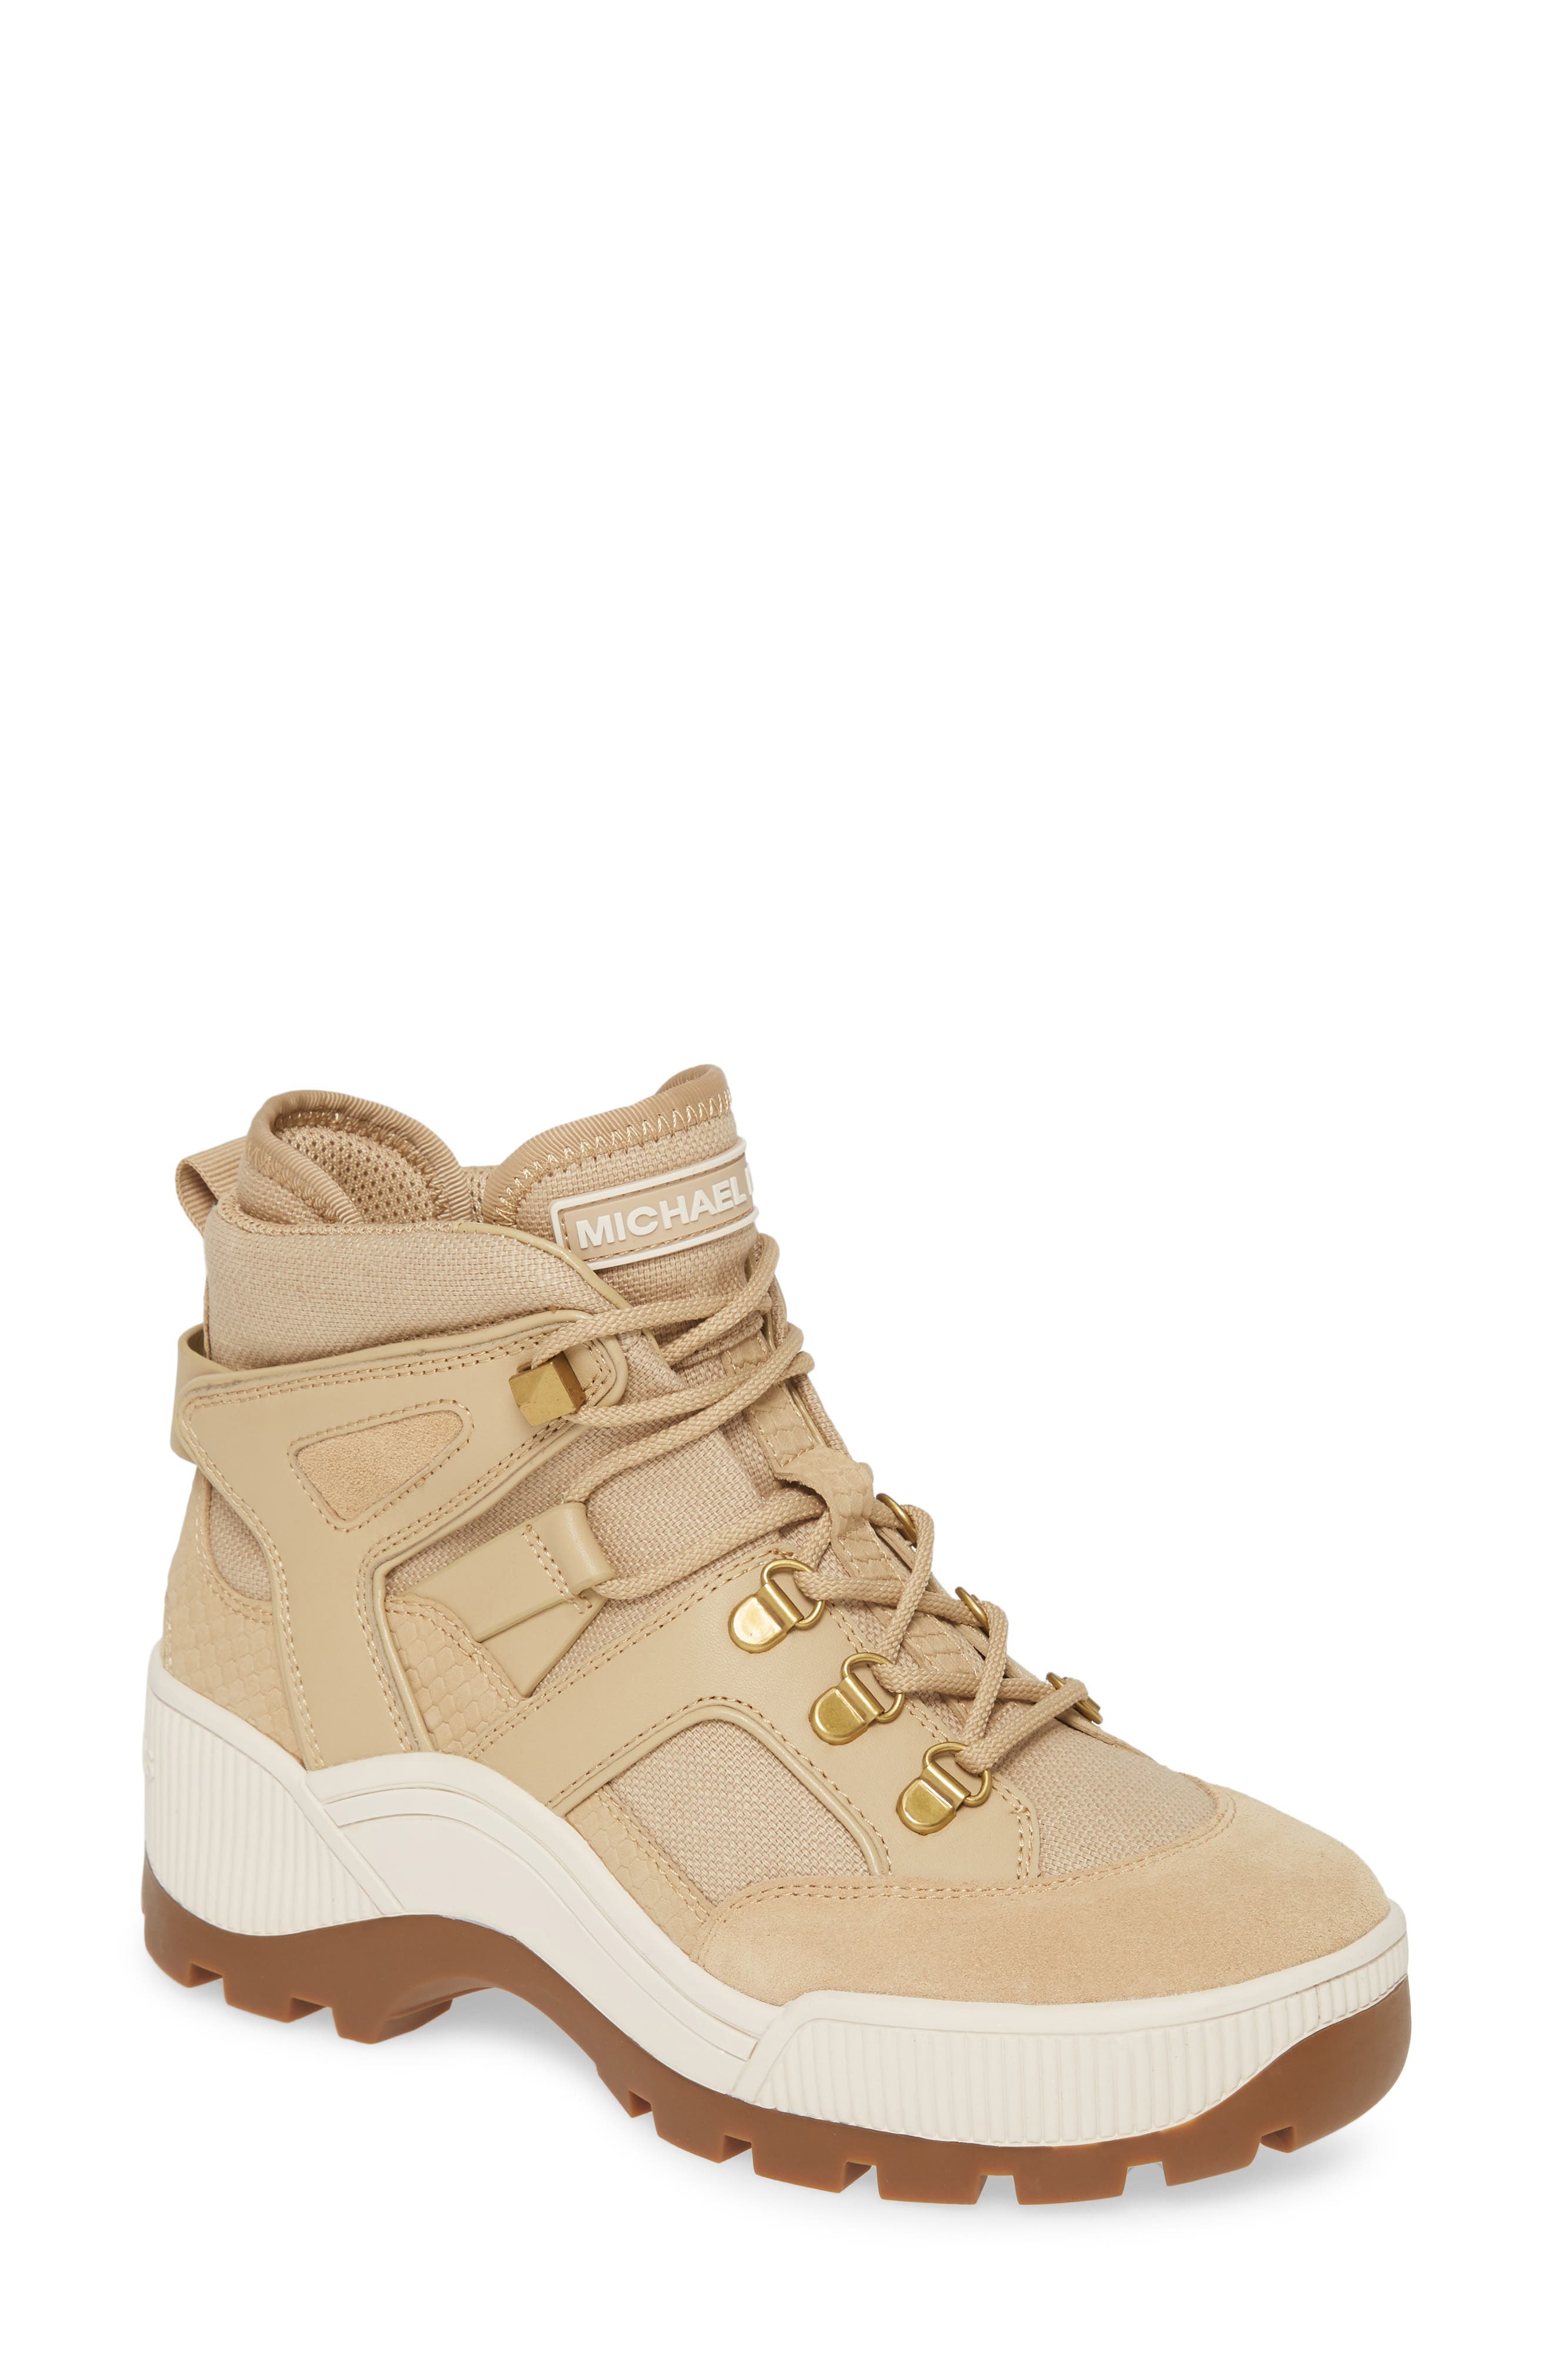 nordstrom rack hiking boots